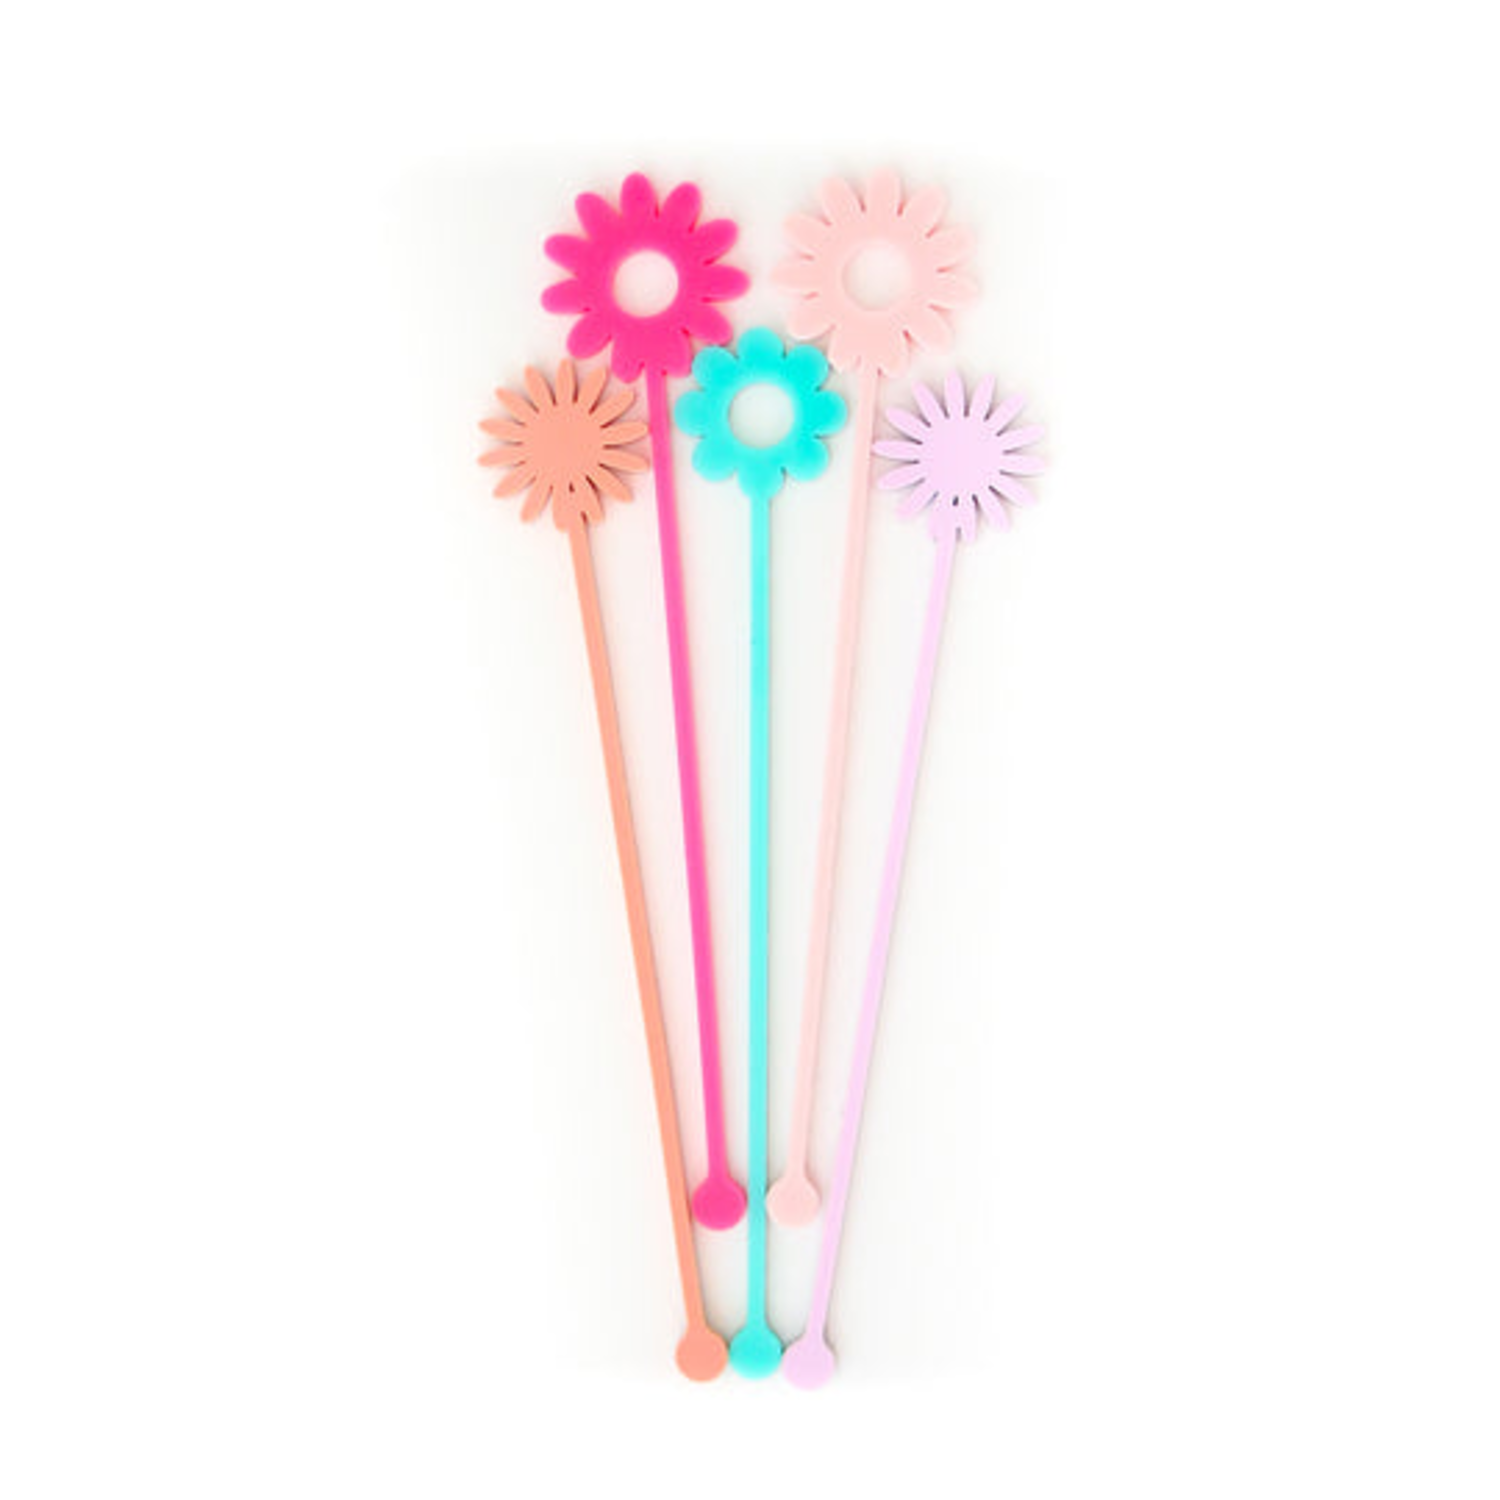 KAILO CHIC Flower Power Drink Stirrers - Amber Marie and Company